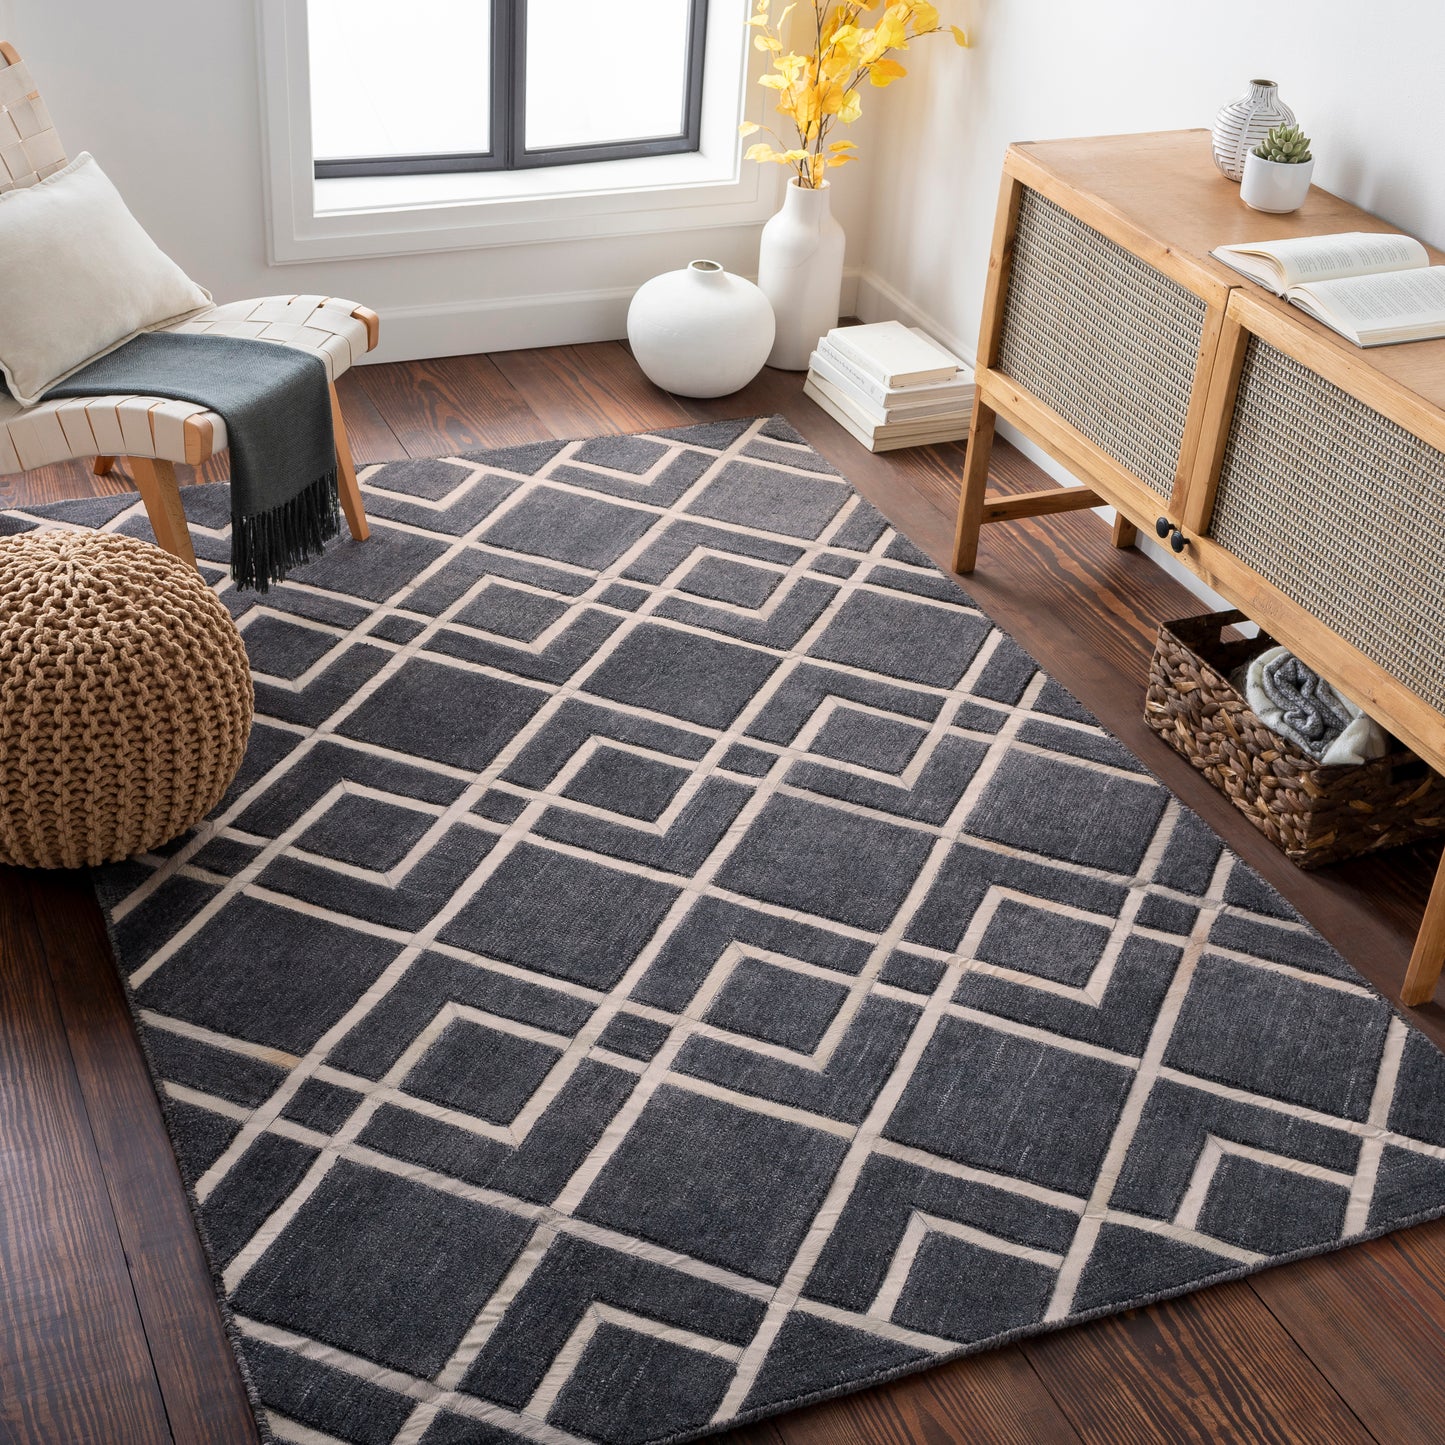 Eloquent 29558 Hand Crafted Synthetic Blend Indoor Area Rug by Surya Rugs